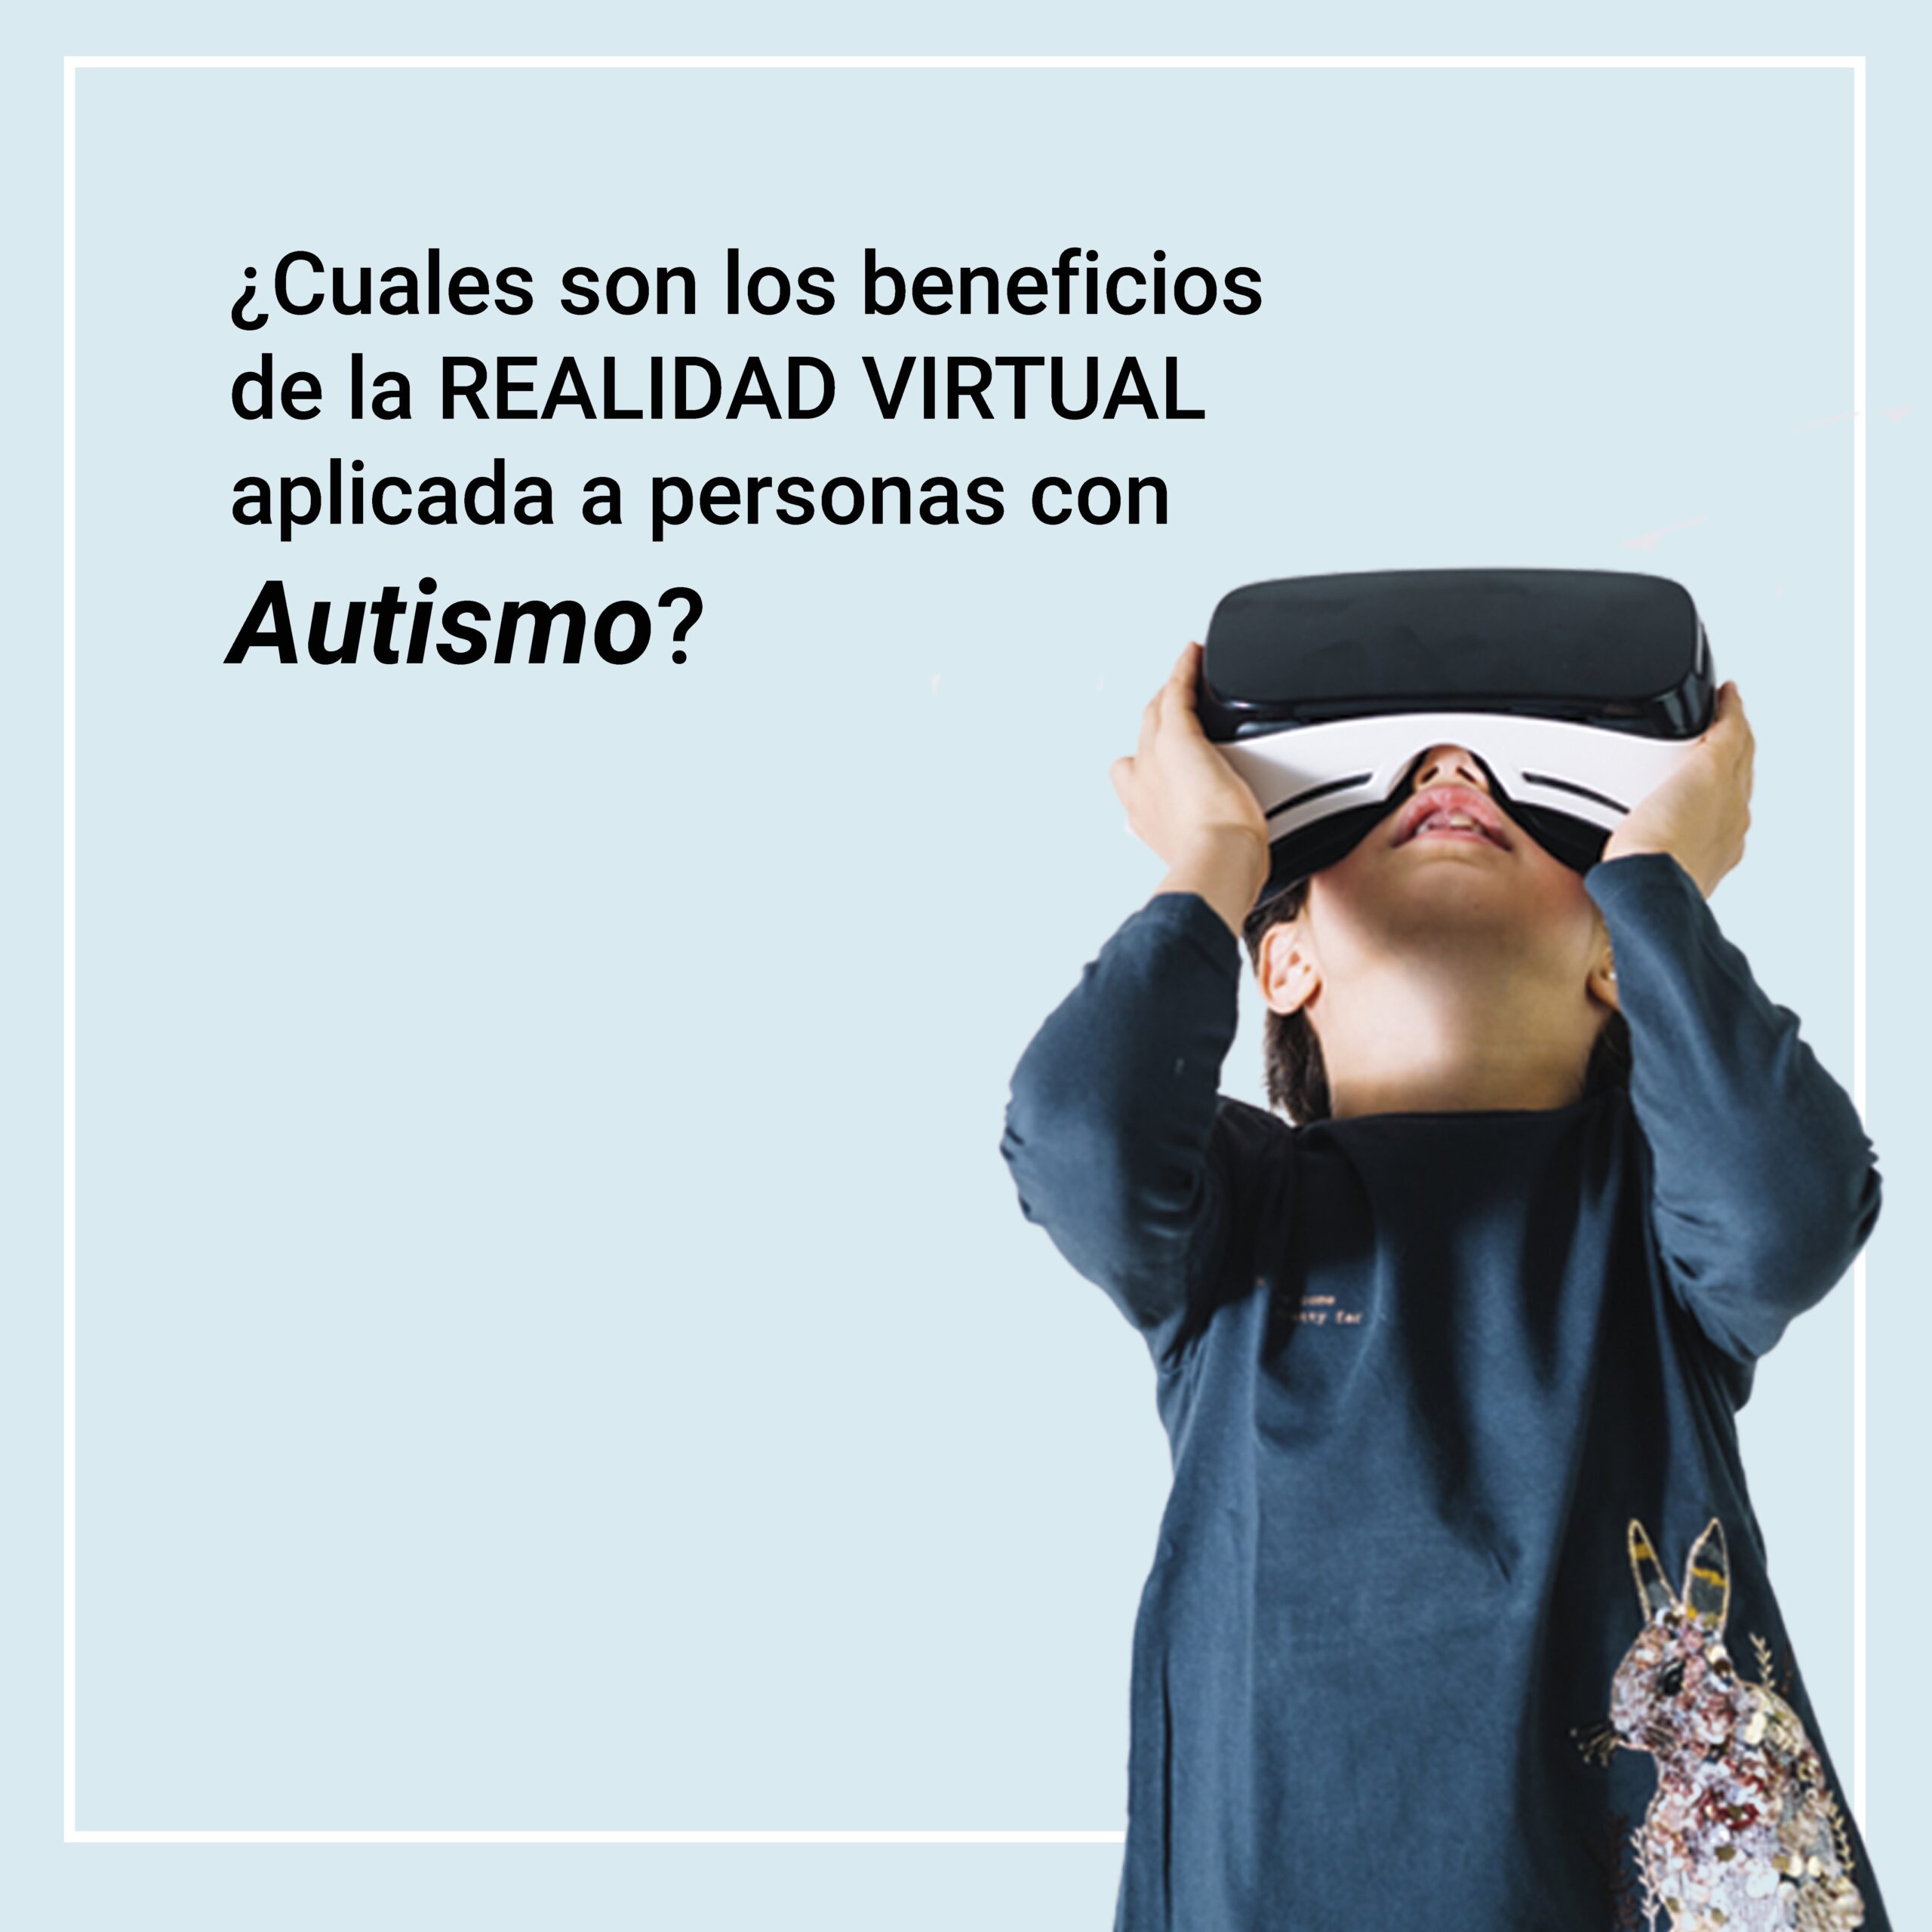 mastermind Tegne forsikring Ødelæggelse The benefits of virtual reality applied to people with autism - Amelia  Virtual Care